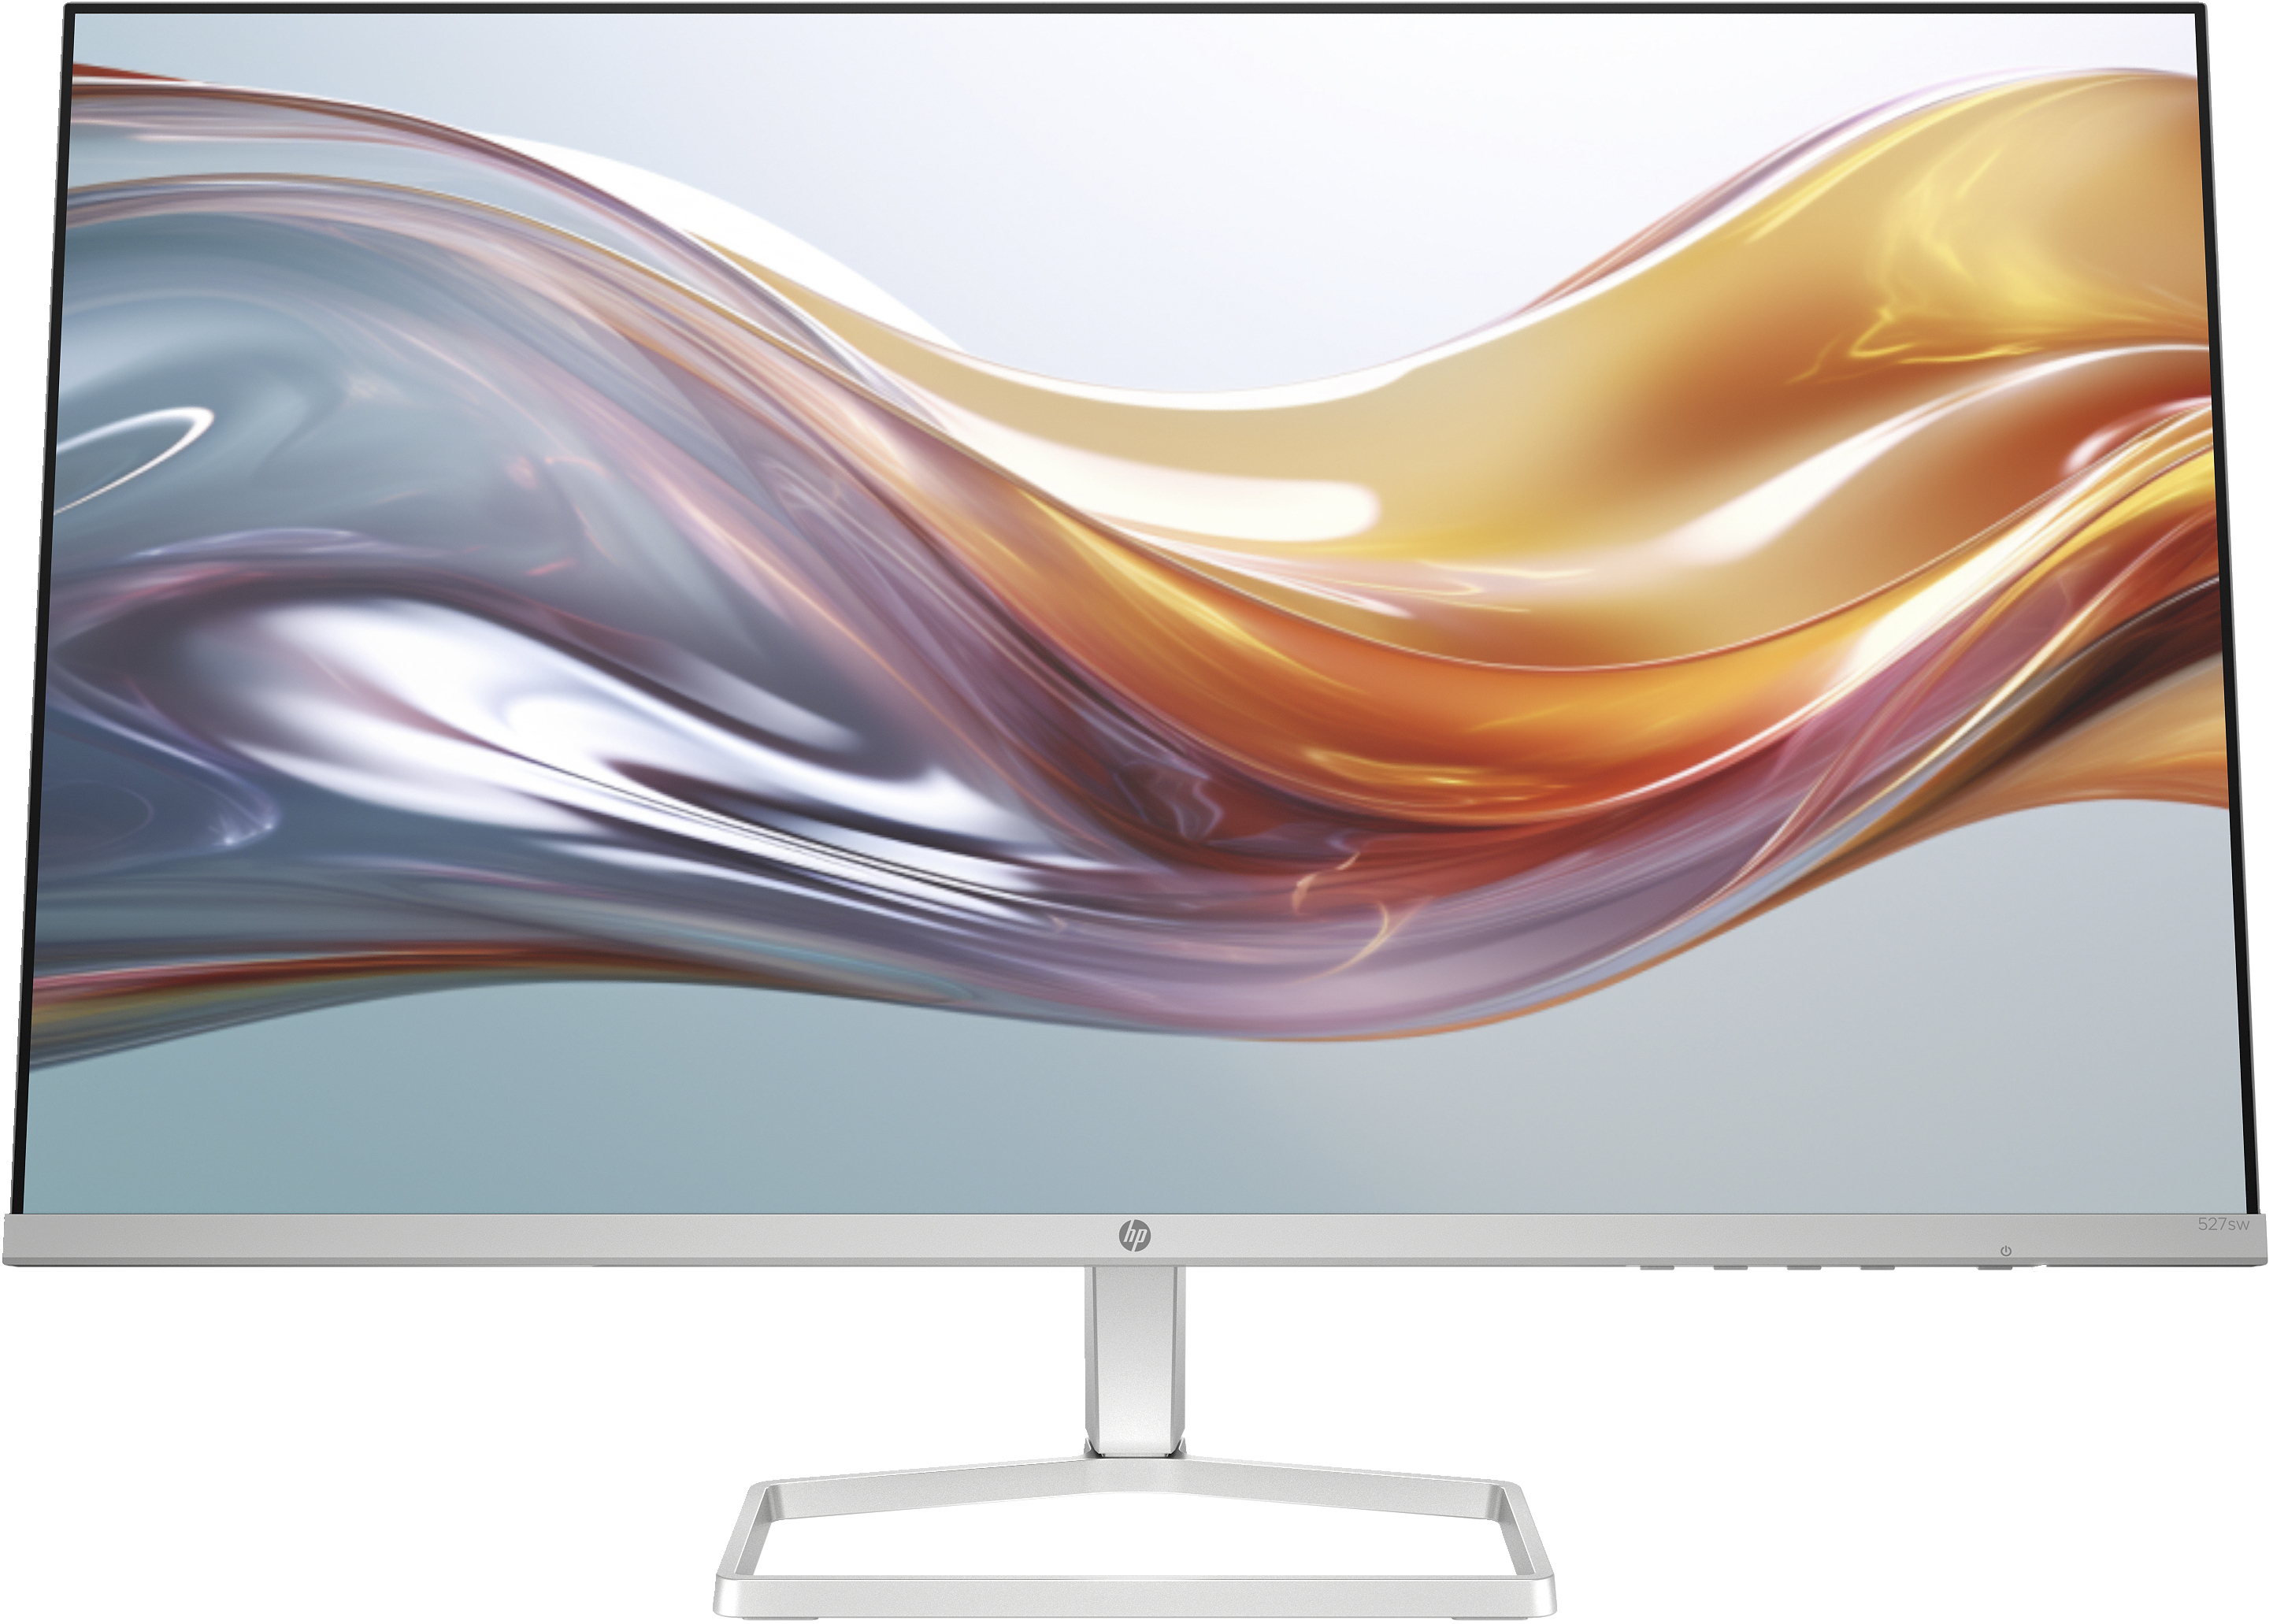 HP Serie 5 27 inch FHD-monitor wit - 527sw